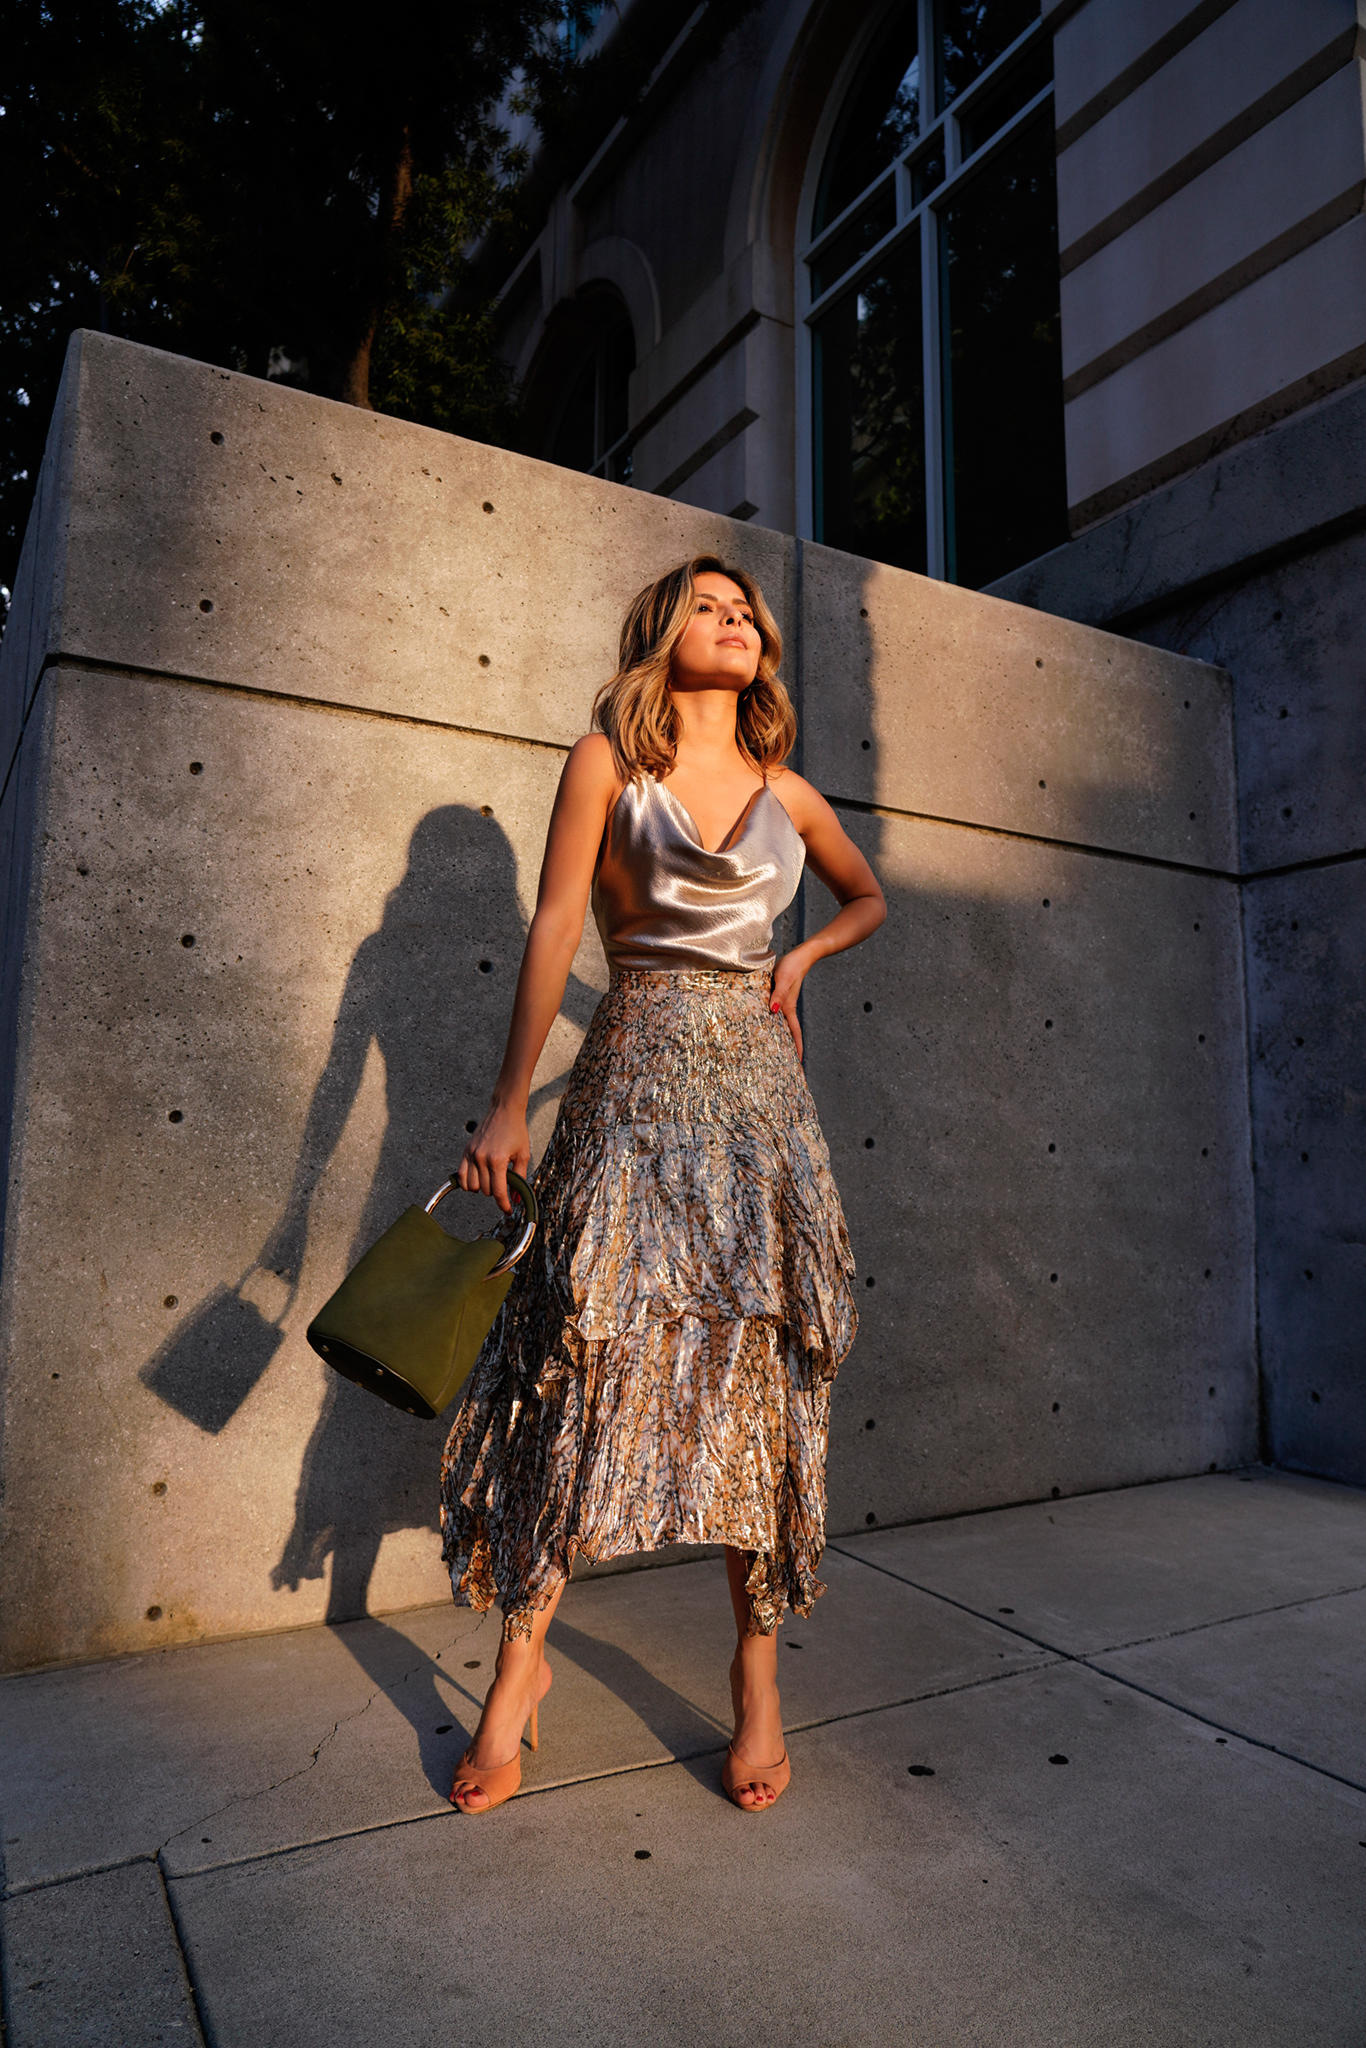 How to Nail a Perfect Night Out Look by Pam Hetlinger | TheGirlFromPanama.com | Metallic Cami, Strappy Heels, Metallic dressing, ruffle metallic skirt